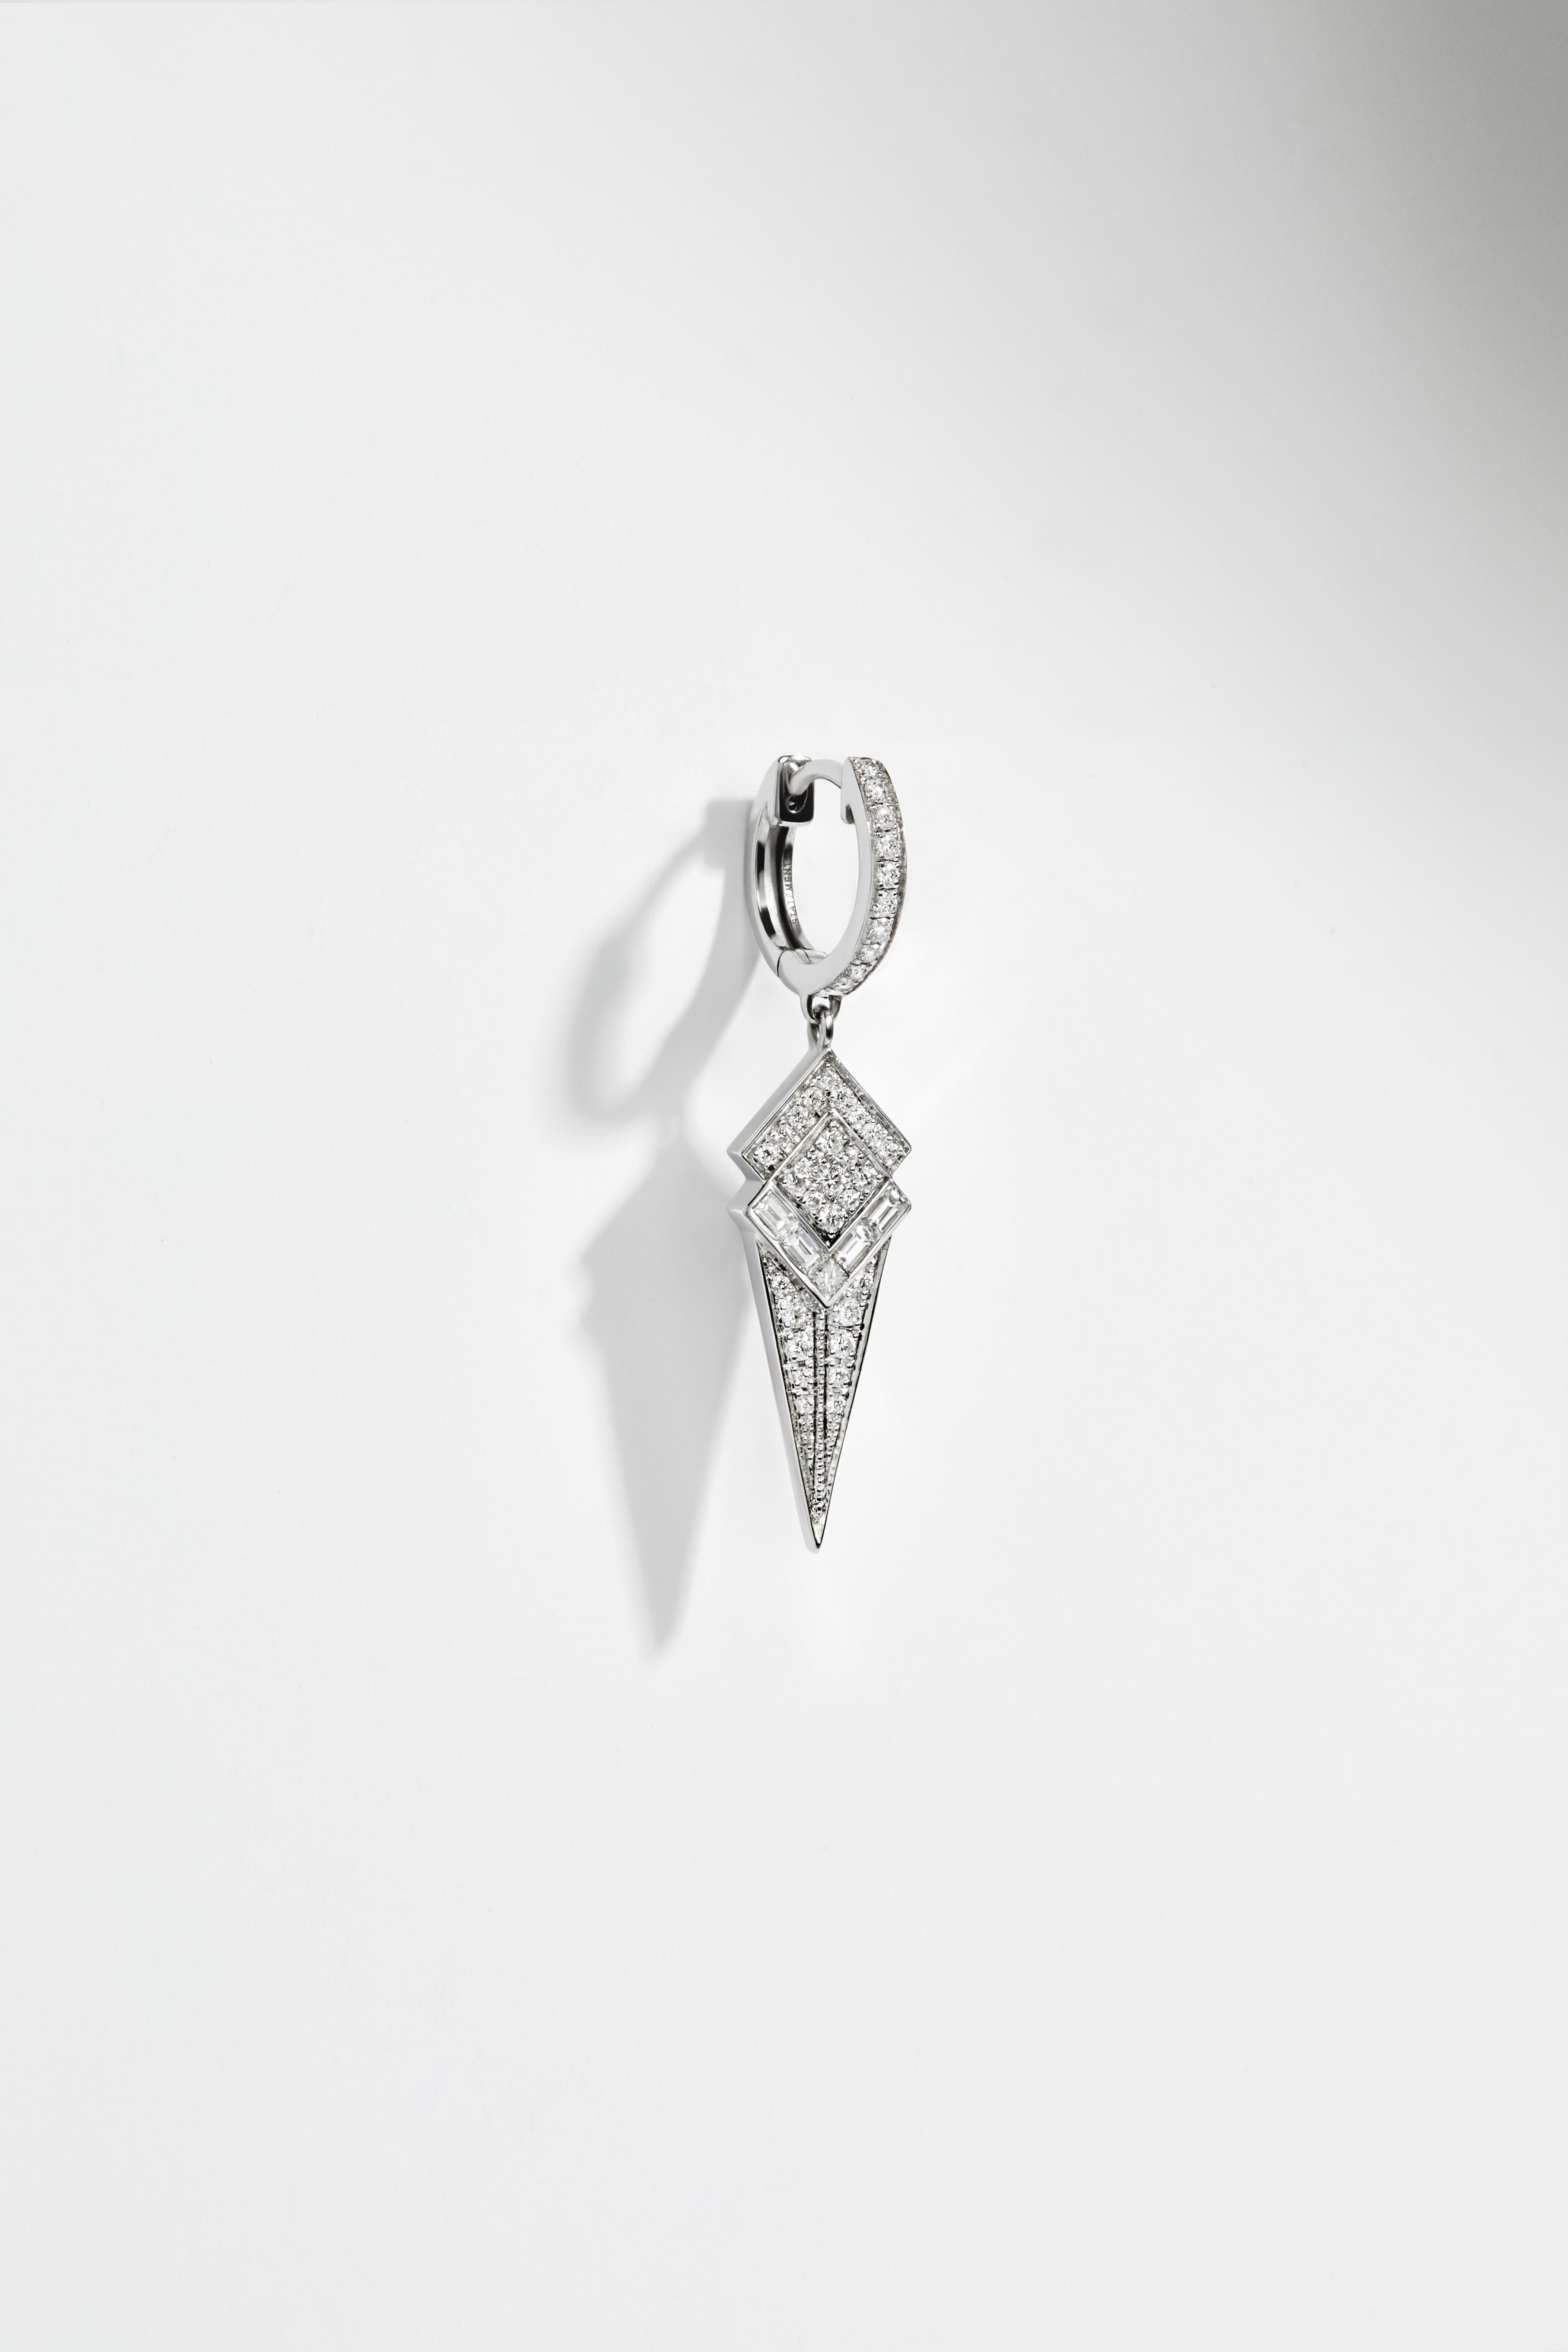 Hoop Stairway Cone in rhodium plated sterling silver, set with 39 brilliant-cut diamonds and 4 baguette-cut diamonds, quality G-VS, totaling 0,25 carat. 

This conical-shaped hoop is made of rhodium plated sterling silver paved with white diamonds.